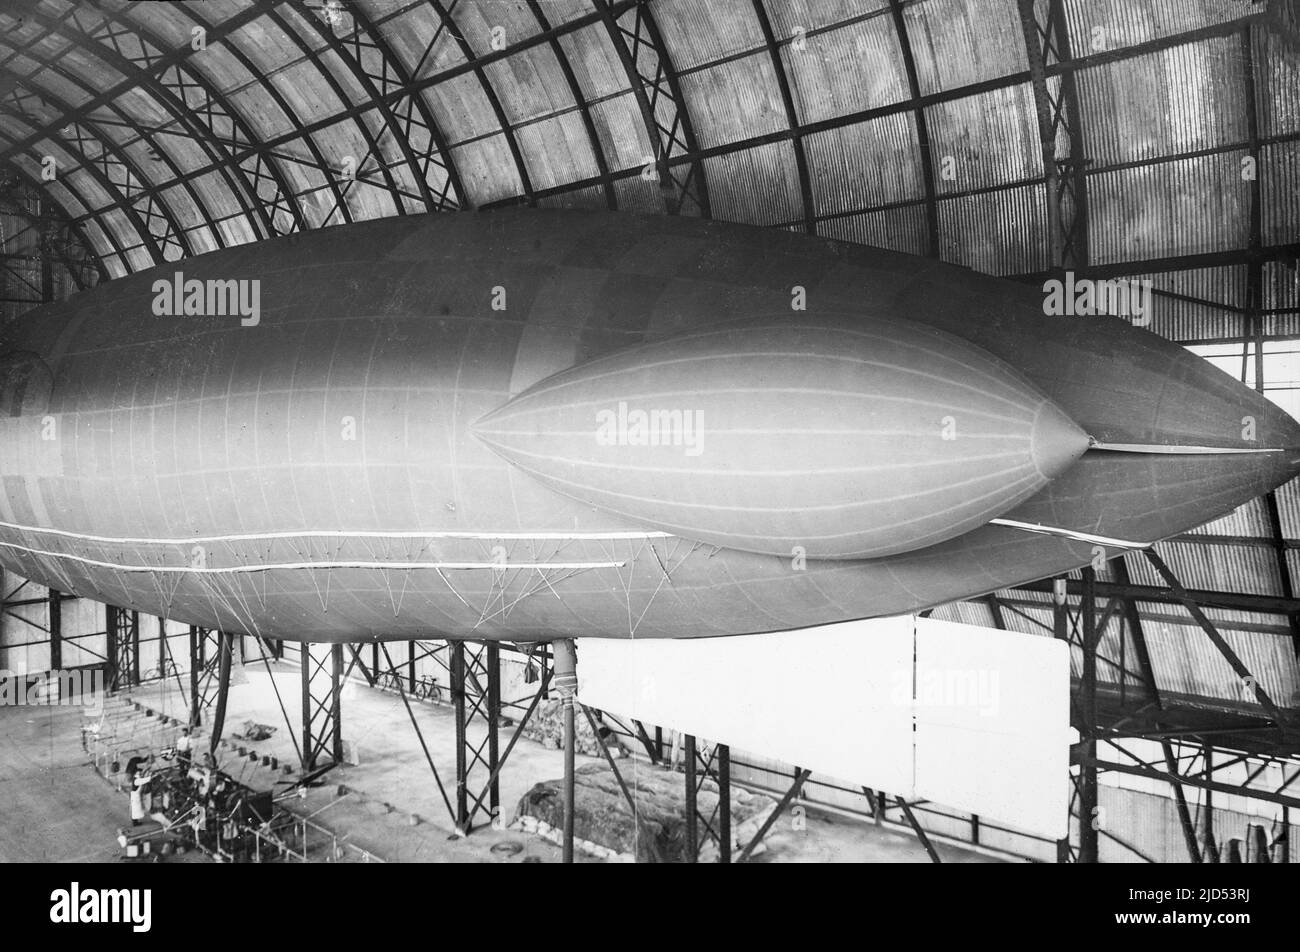 The Gamma Airship as used initially by The British Royal Flying Corps before being bought by The Royal Naval Air Service. Photo shows the initial version of the airship in 1910, in its hangar. Stock Photo